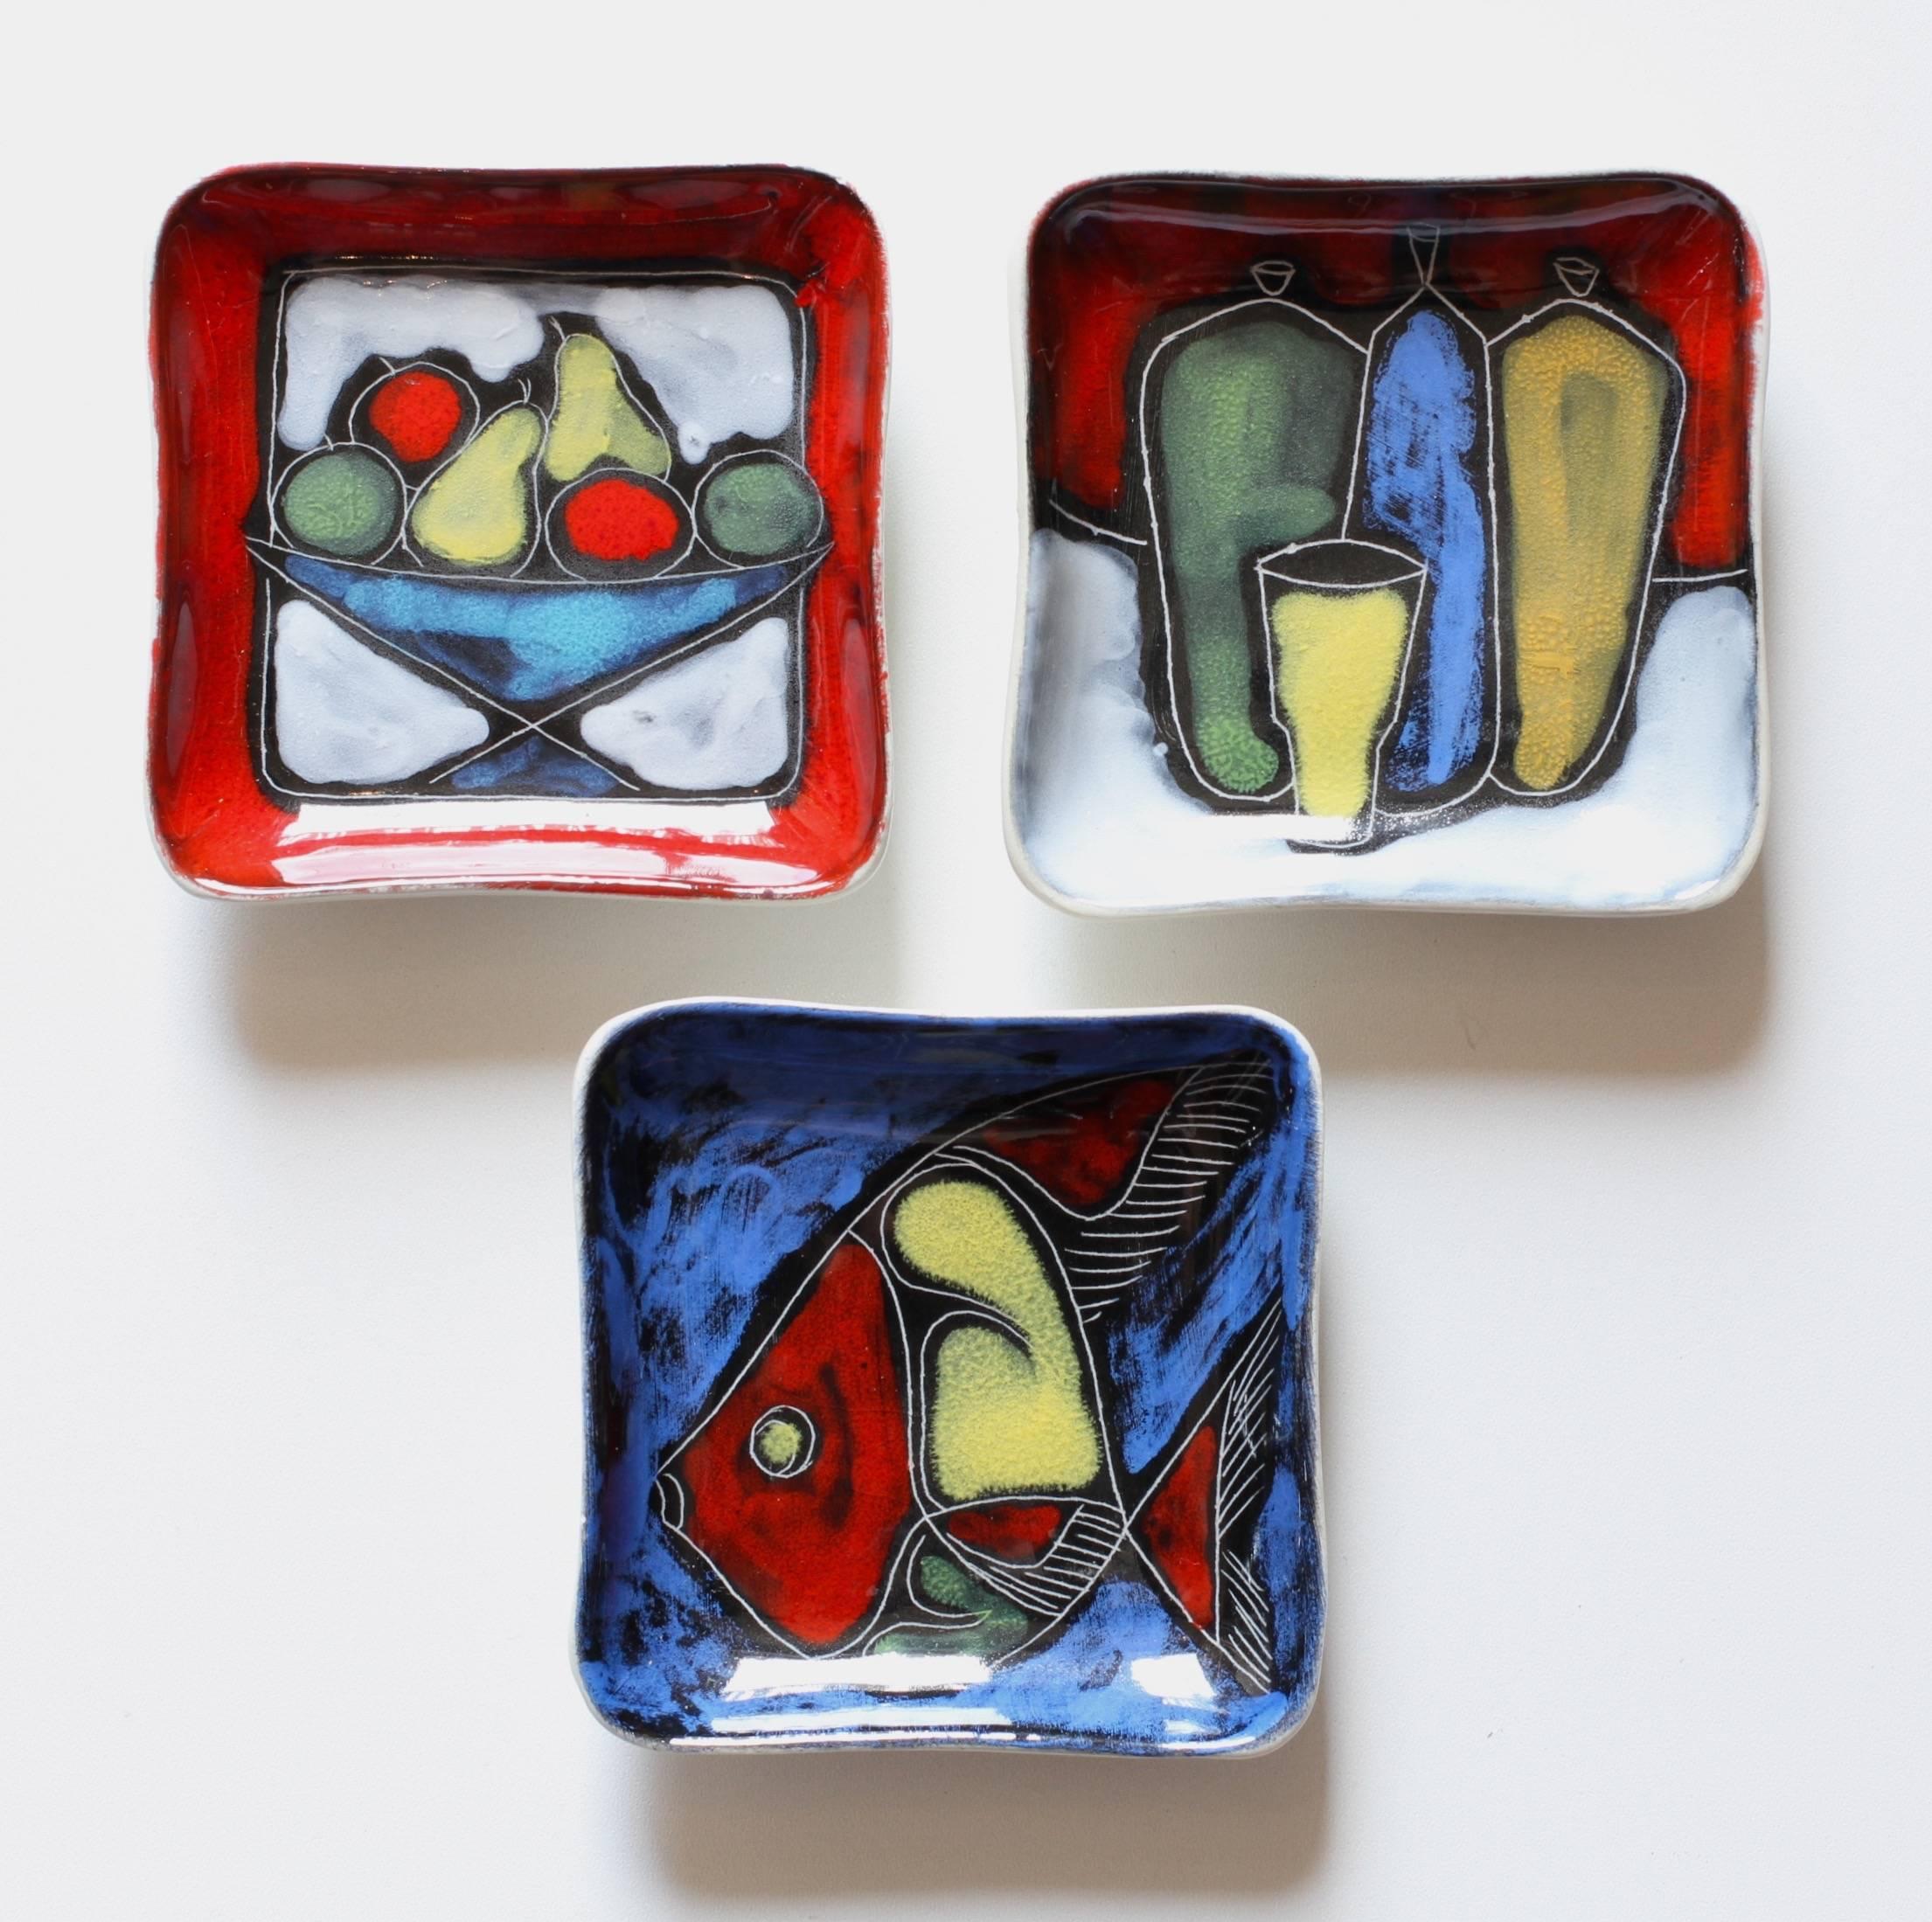 Italian set of three vintage Mid-Century Modern small serving bowls, ashtrays or dishes, made in Italy, circa late 1950s-early 1960s. Attributed to one of the various producers of pottery and ceramics in San Marino, Italy.

Featuring three